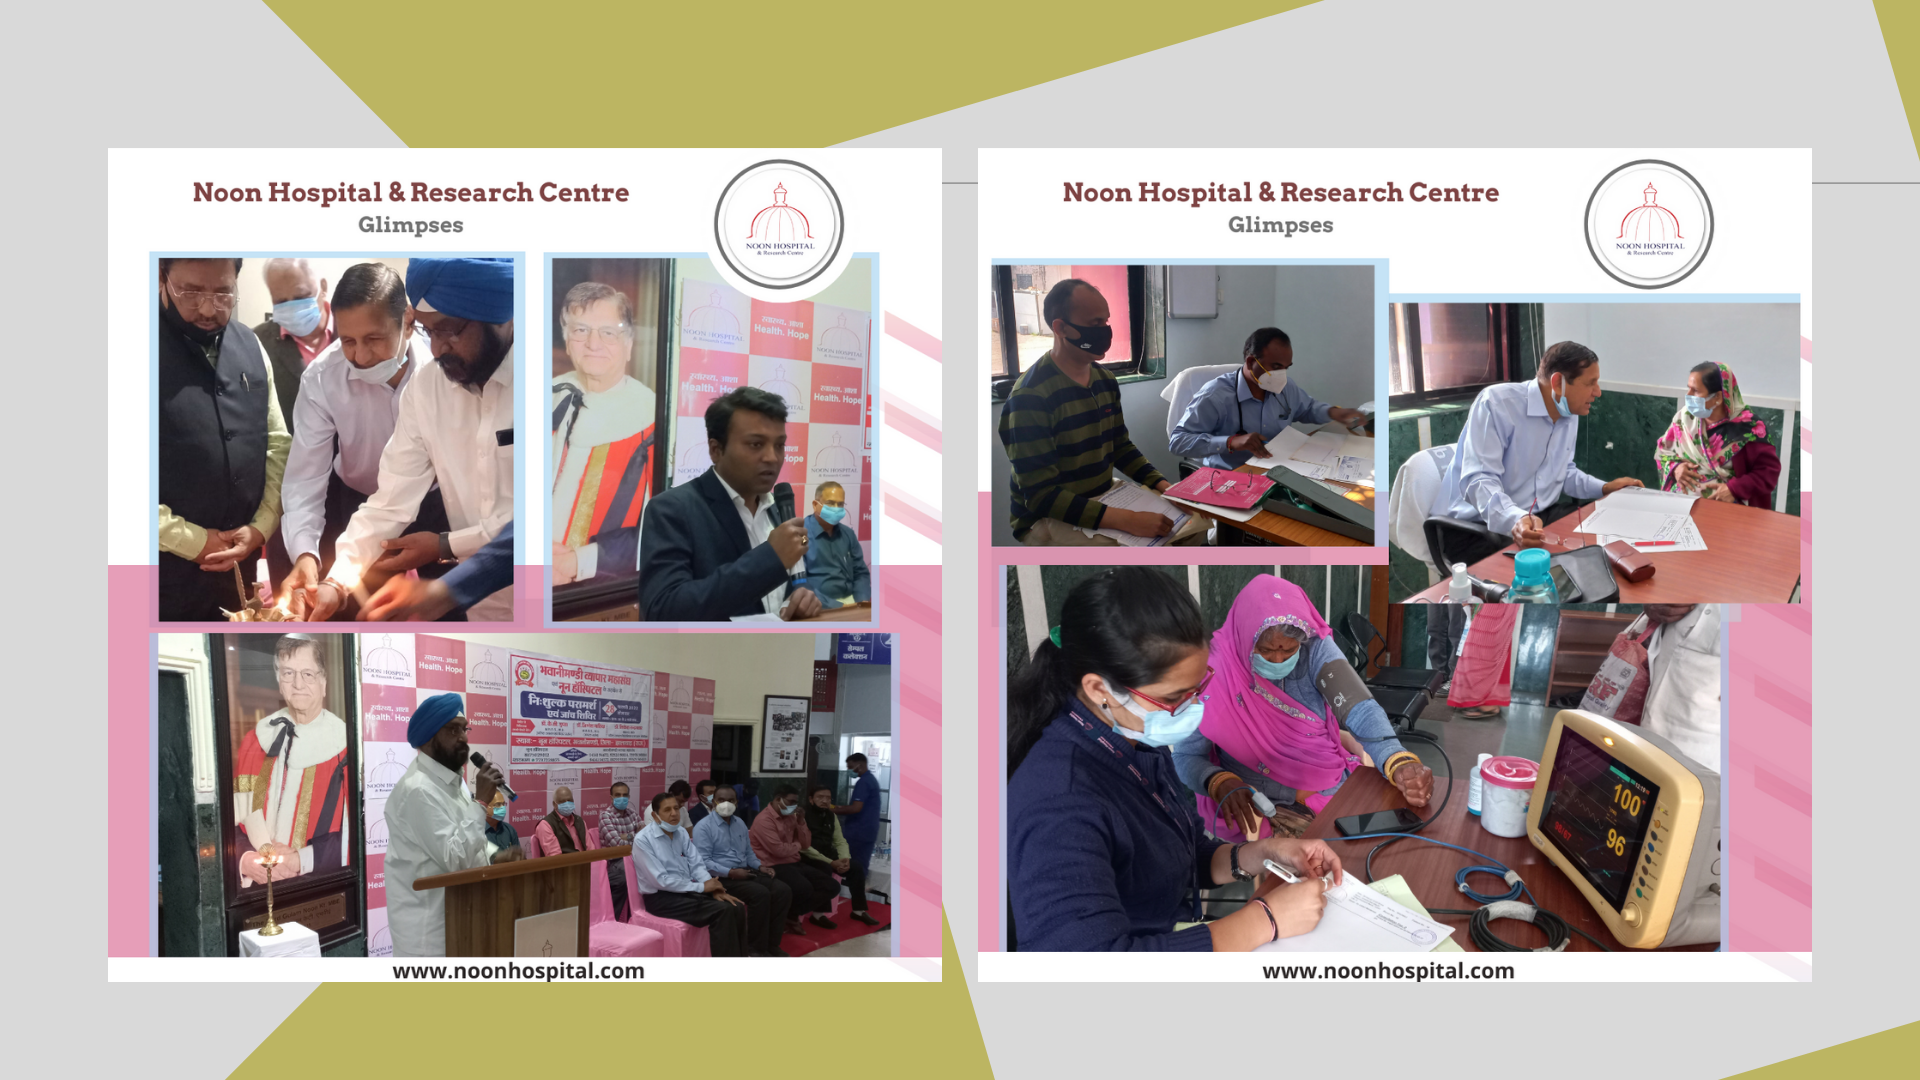 Free Health Check-up Camp was Organized at Noon Hospital